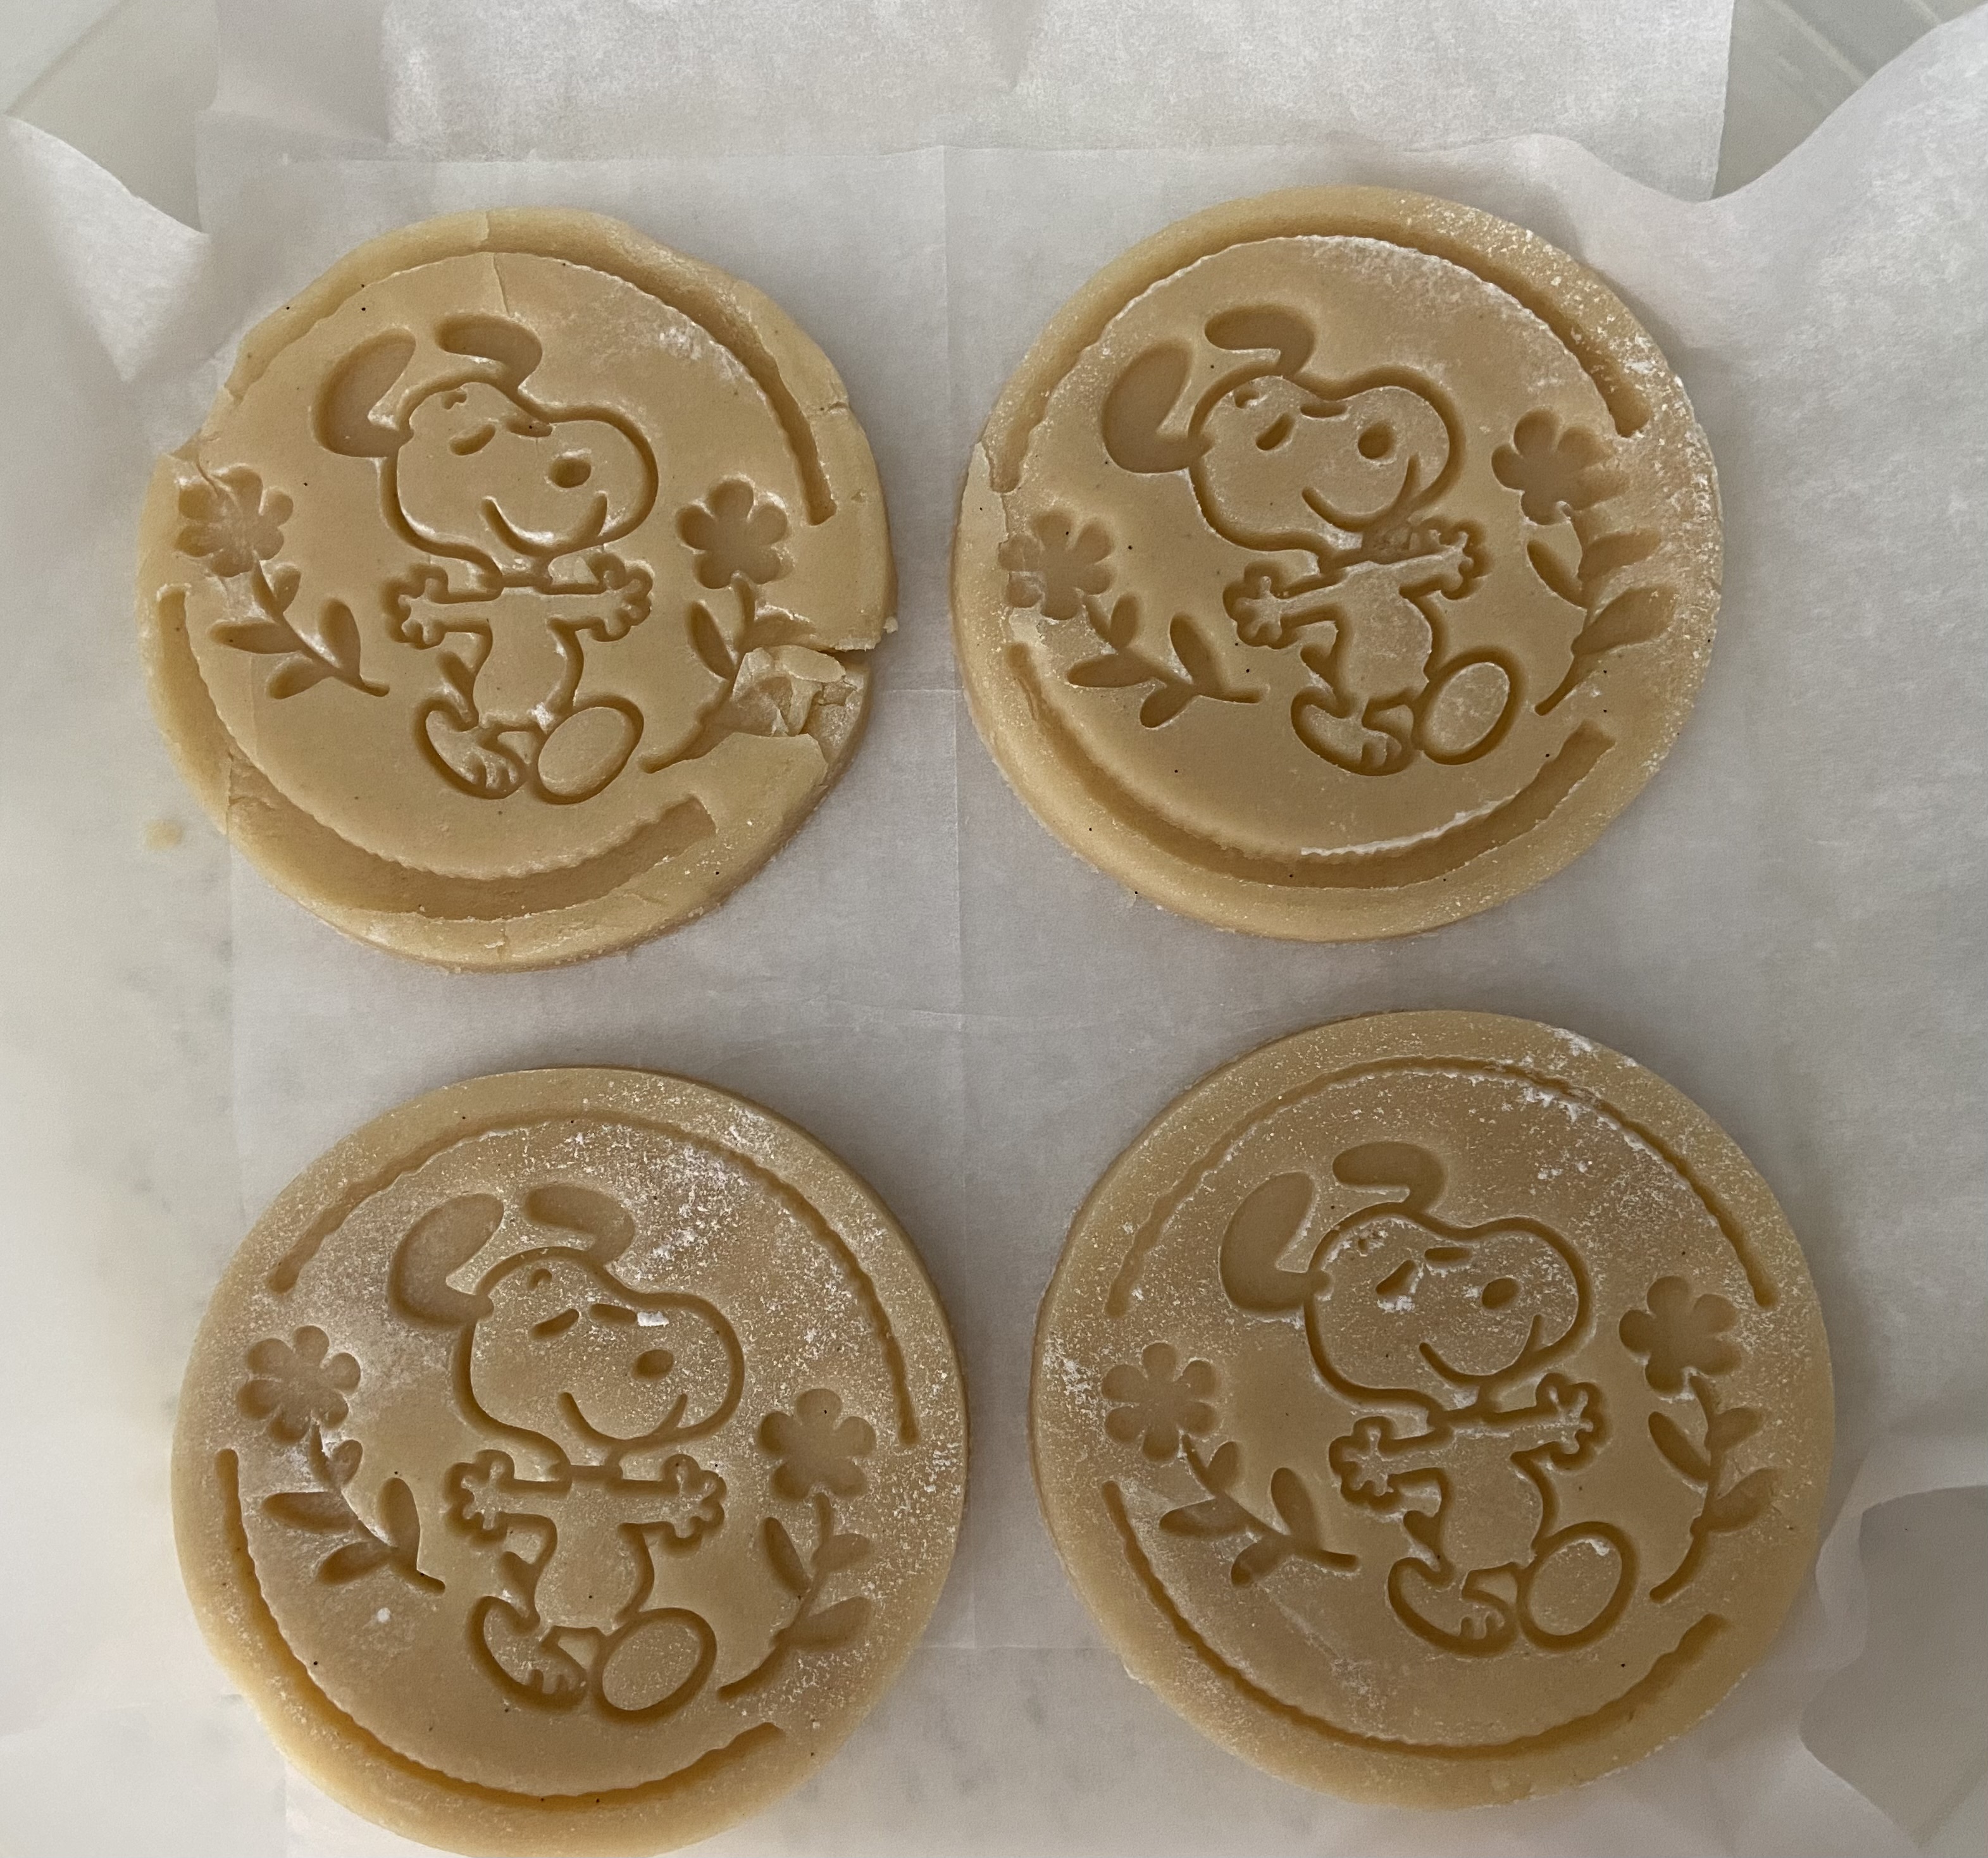 Brown Butter Stamp Cookies Recipe